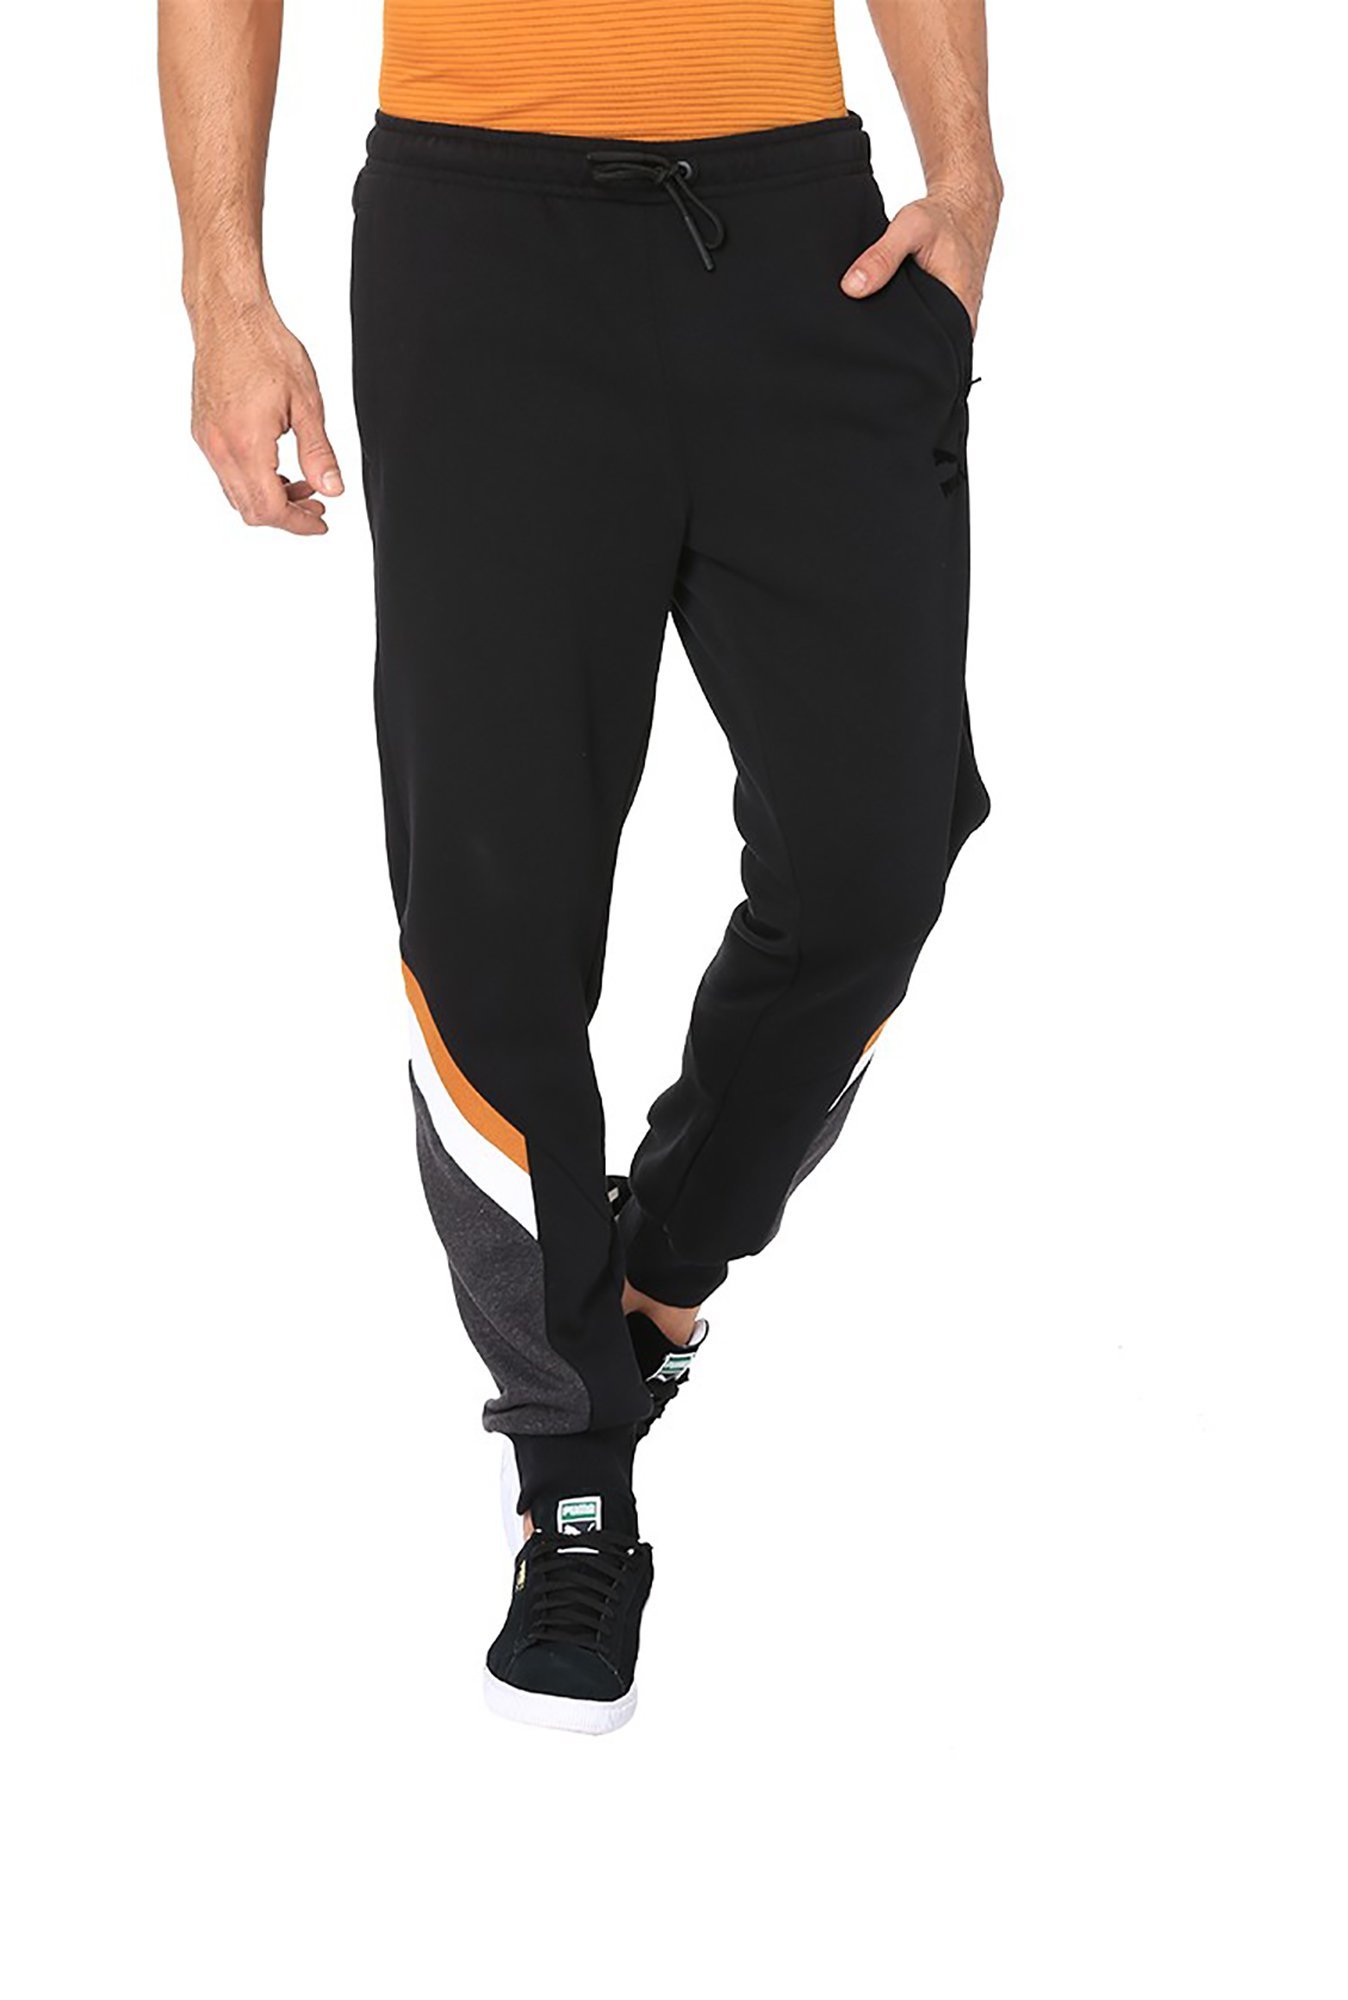 Details more than 74 puma one 8 trousers - in.cdgdbentre